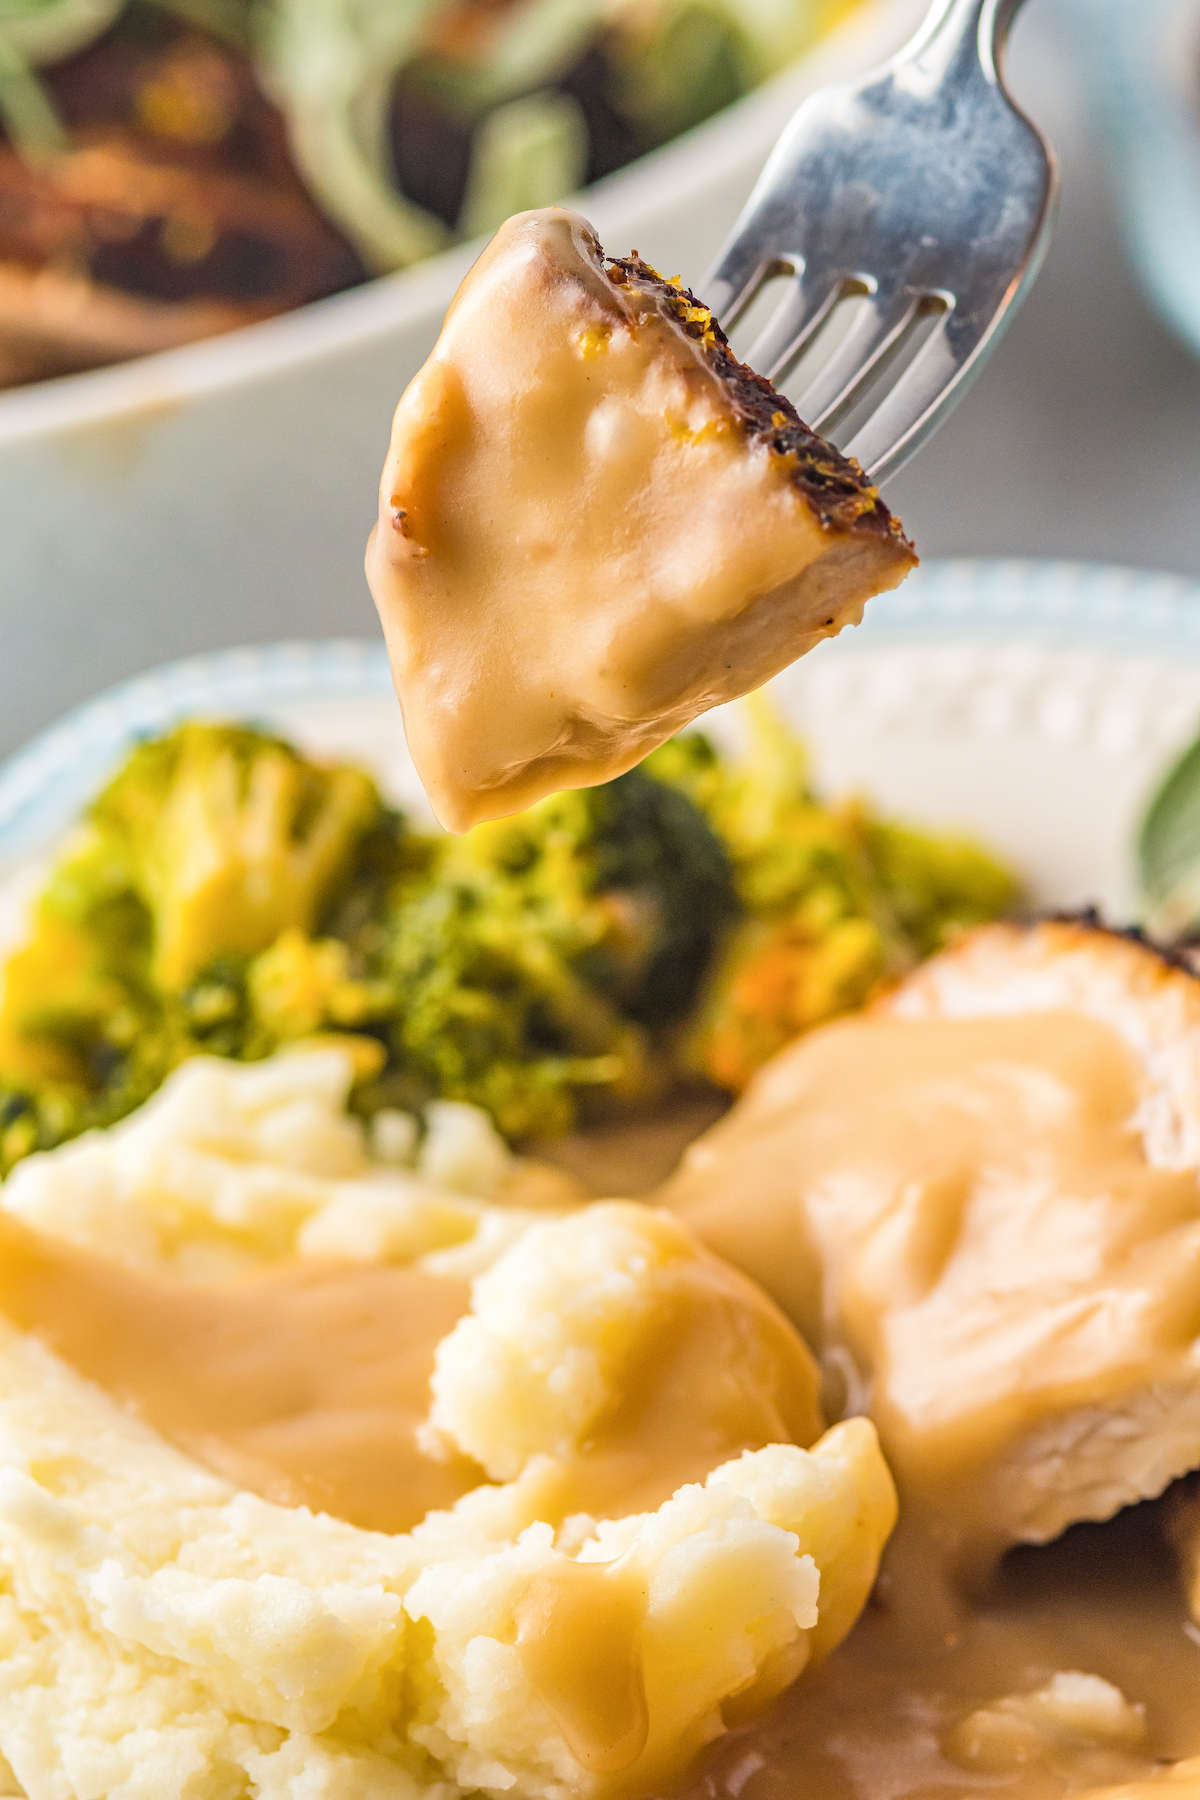 A close-up shot of a silver fork with a bite-sized piece of turkey with gravy.